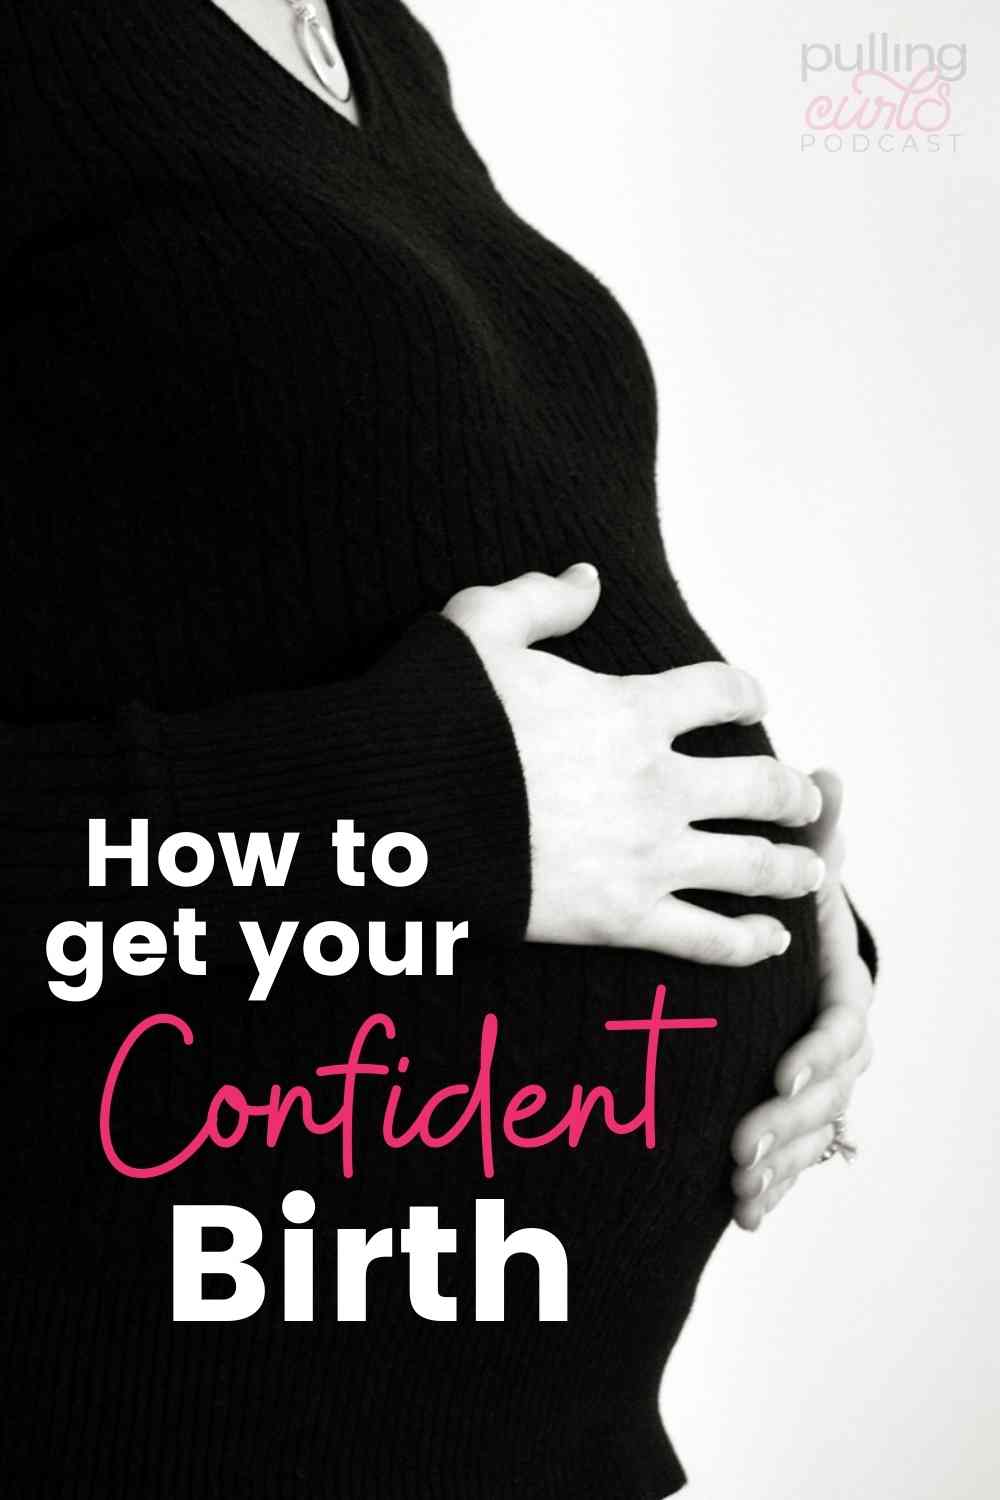 What can you do NOW to help you create your confident birth. Today we talk with a graduate of The Online Prenatal Class for Couples about her birth experience and what helped her feel confident. via @pullingcurls